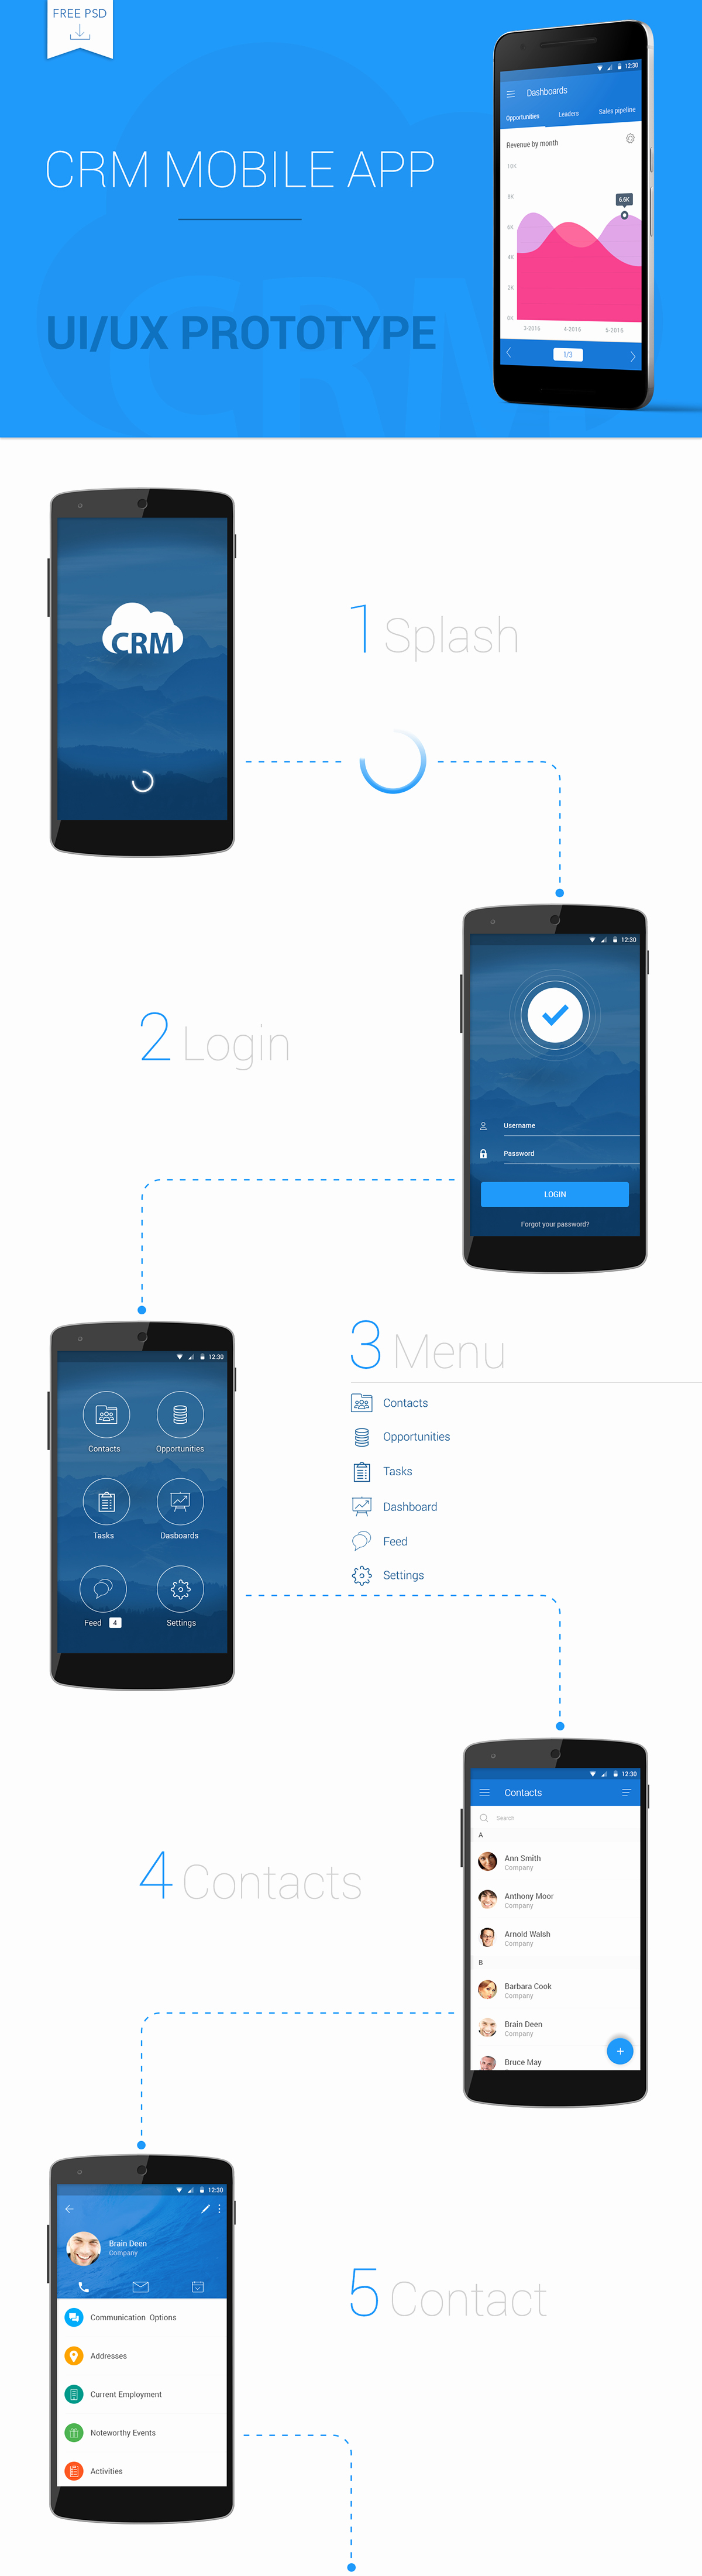 Free Crm Mobile App Psd Template — Free Design Resources